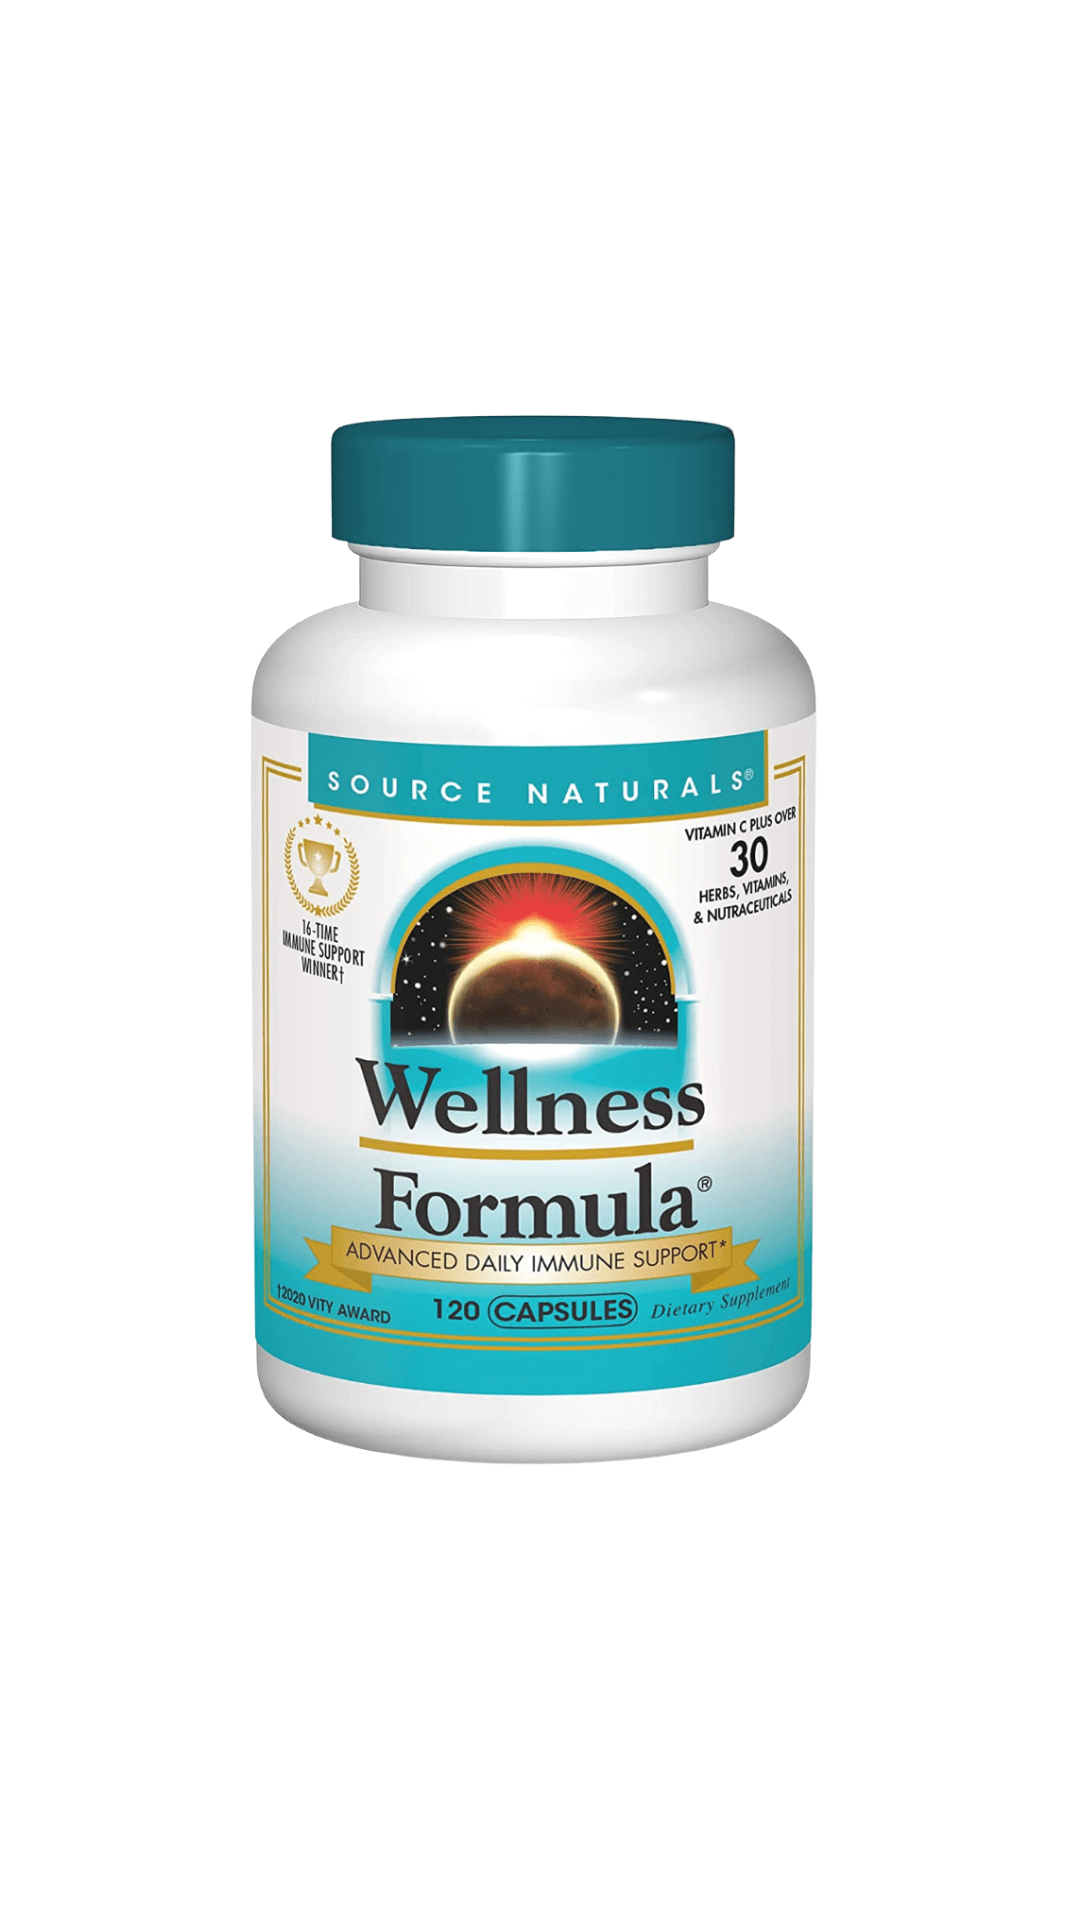 White pill bottle with the words "Wellness Formula" written across the front with teal branding and cap